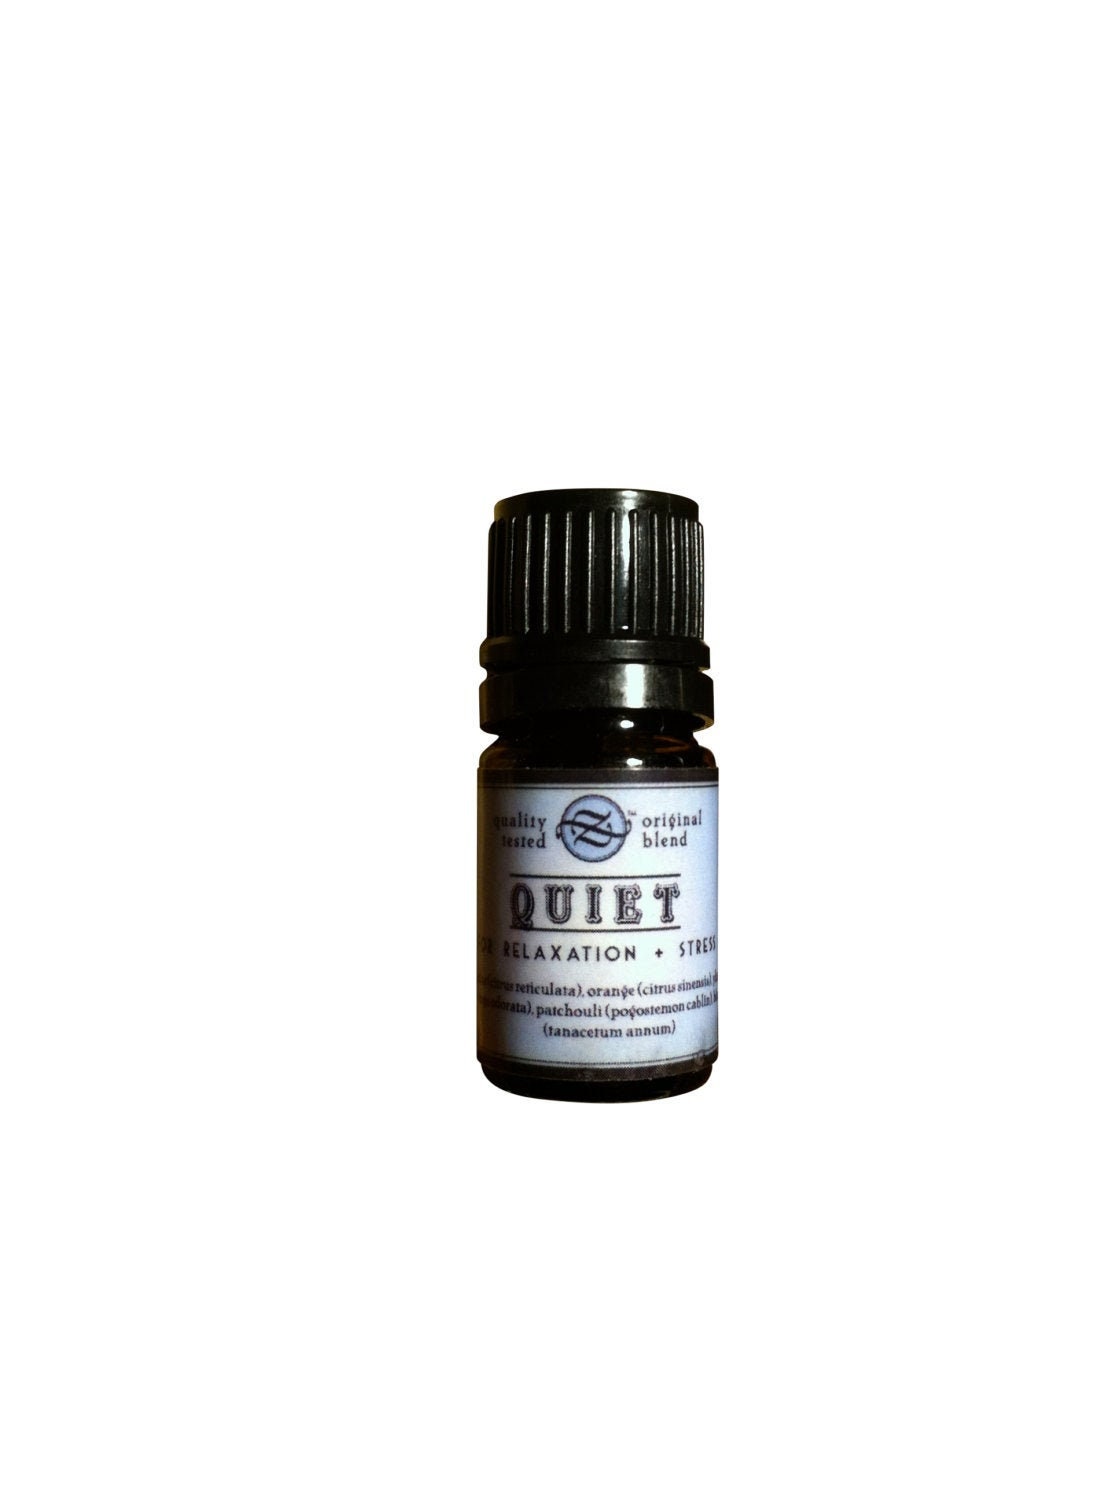 Quiet Essential Oil Blend For Relaxation & Stress